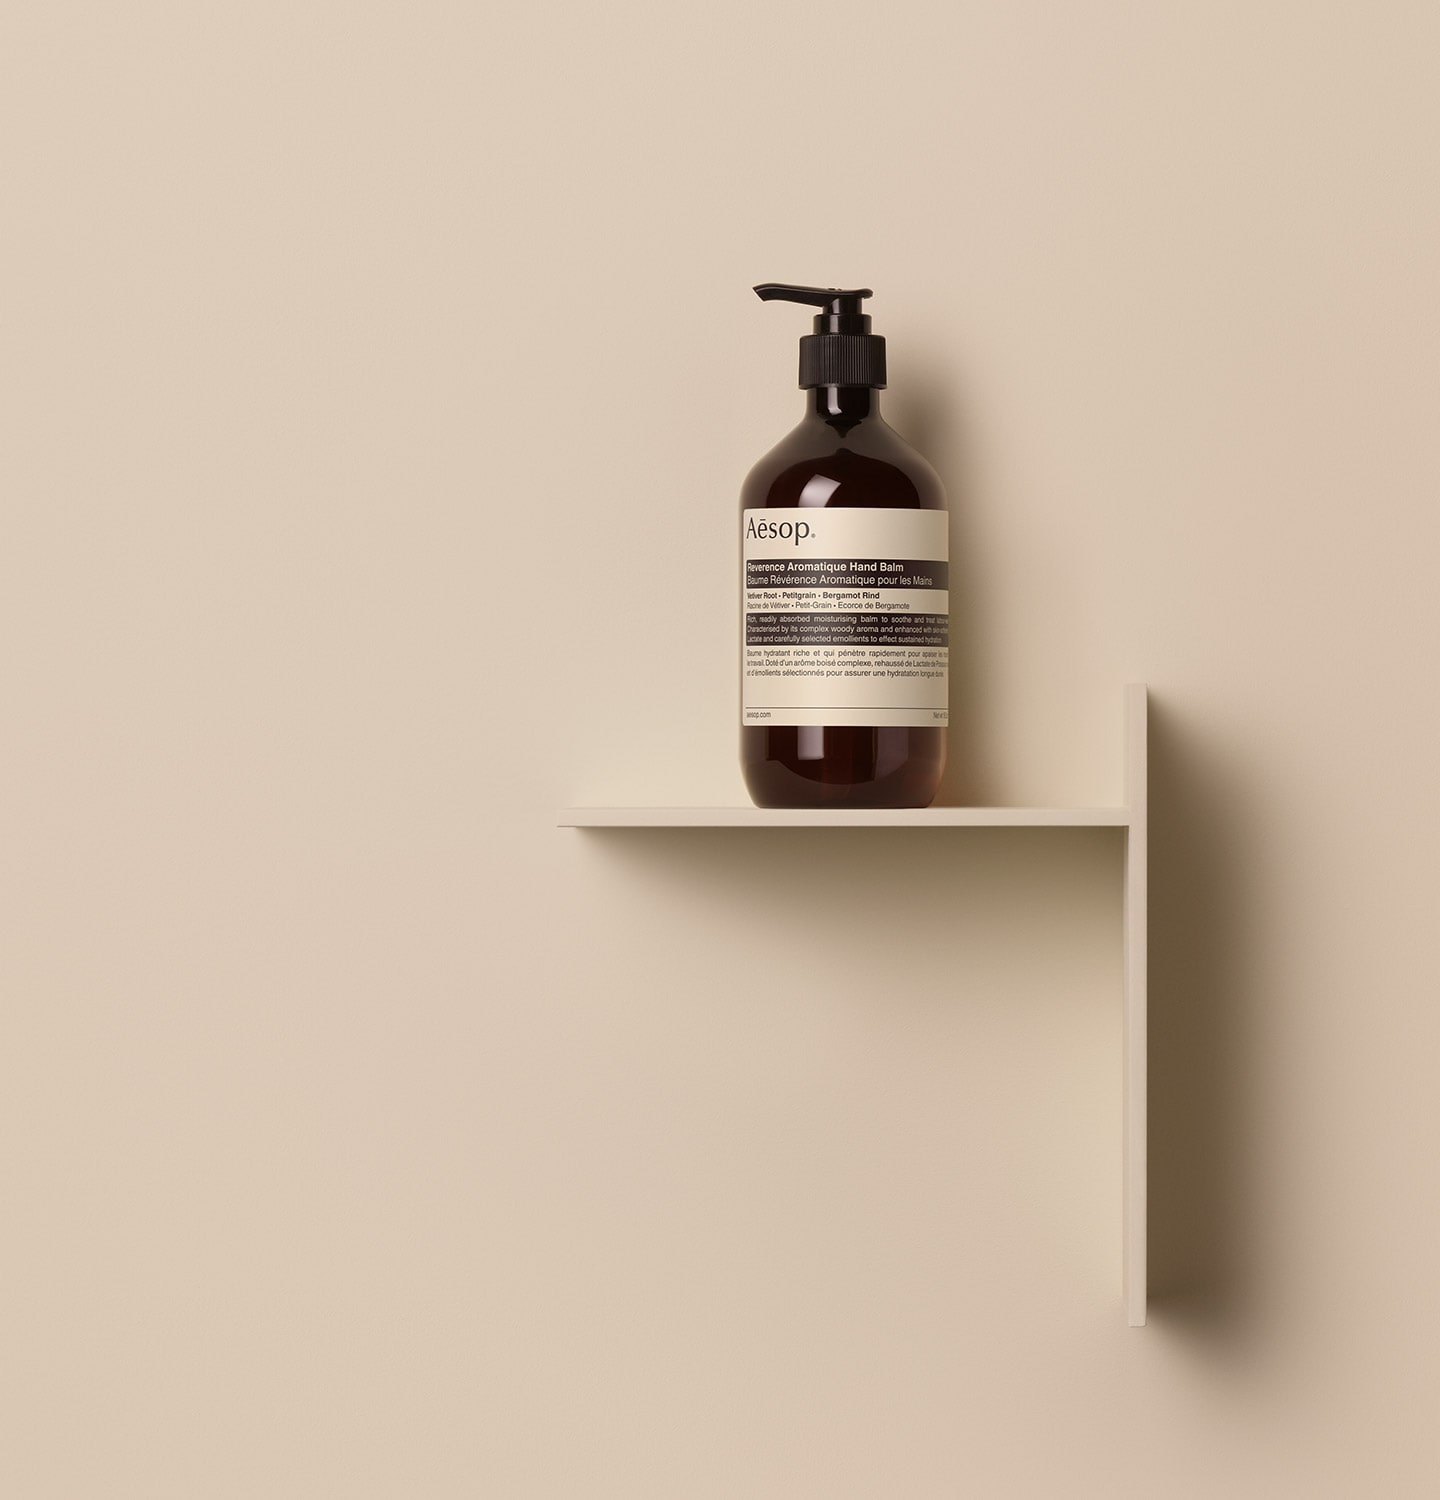 Aesop reverence aromatique hand balm in amber bottle with pump placed on a beige wall